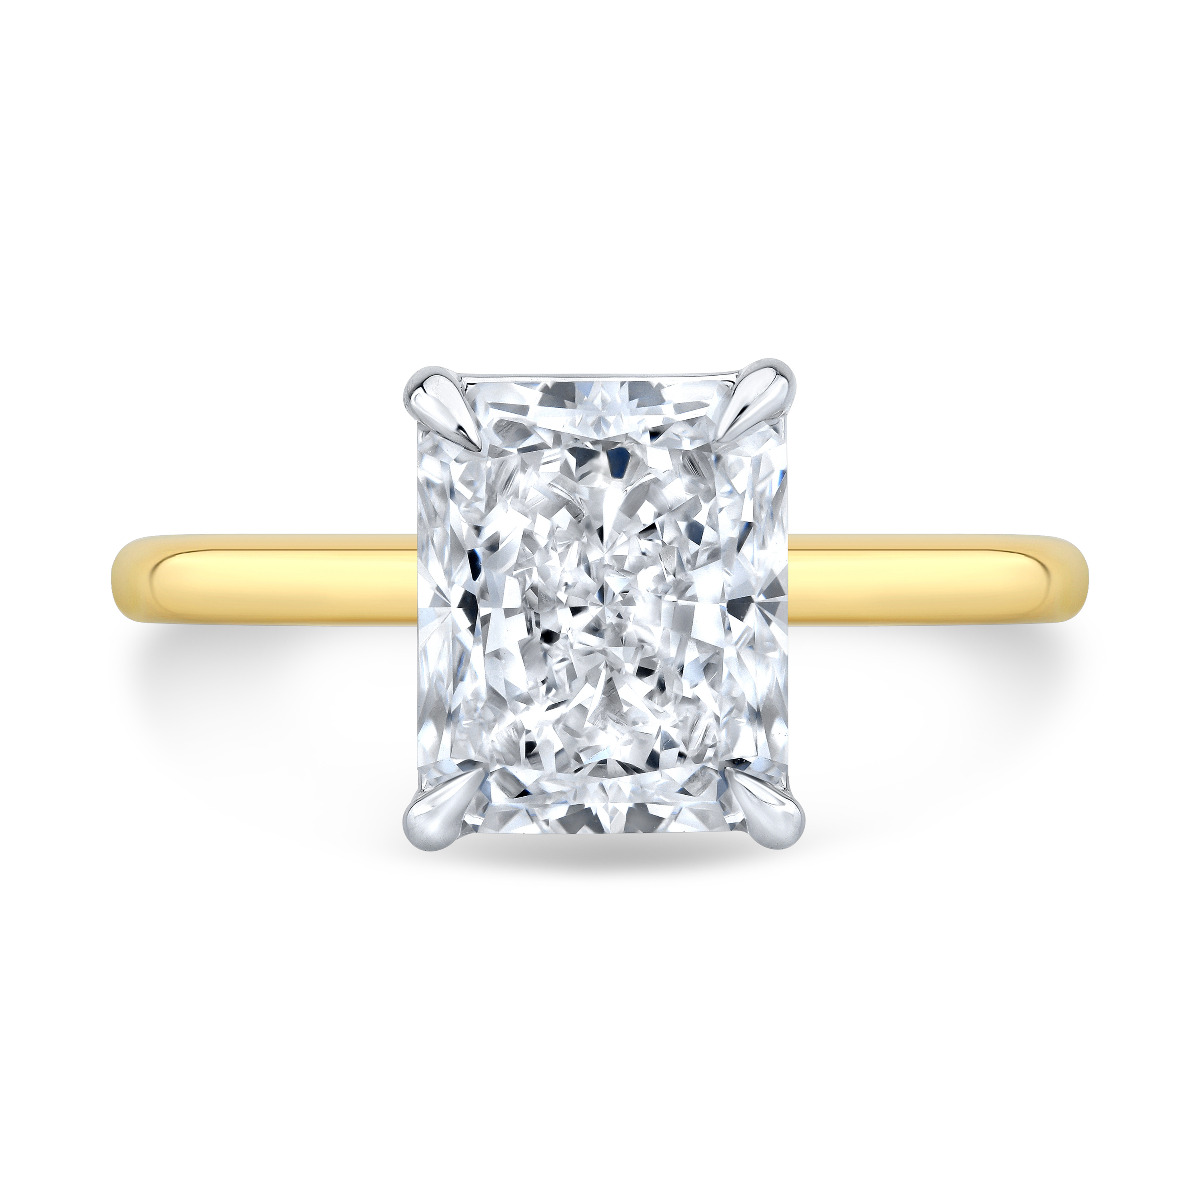 2.50 Carat Radiant cut on a Yellow Gold Band.